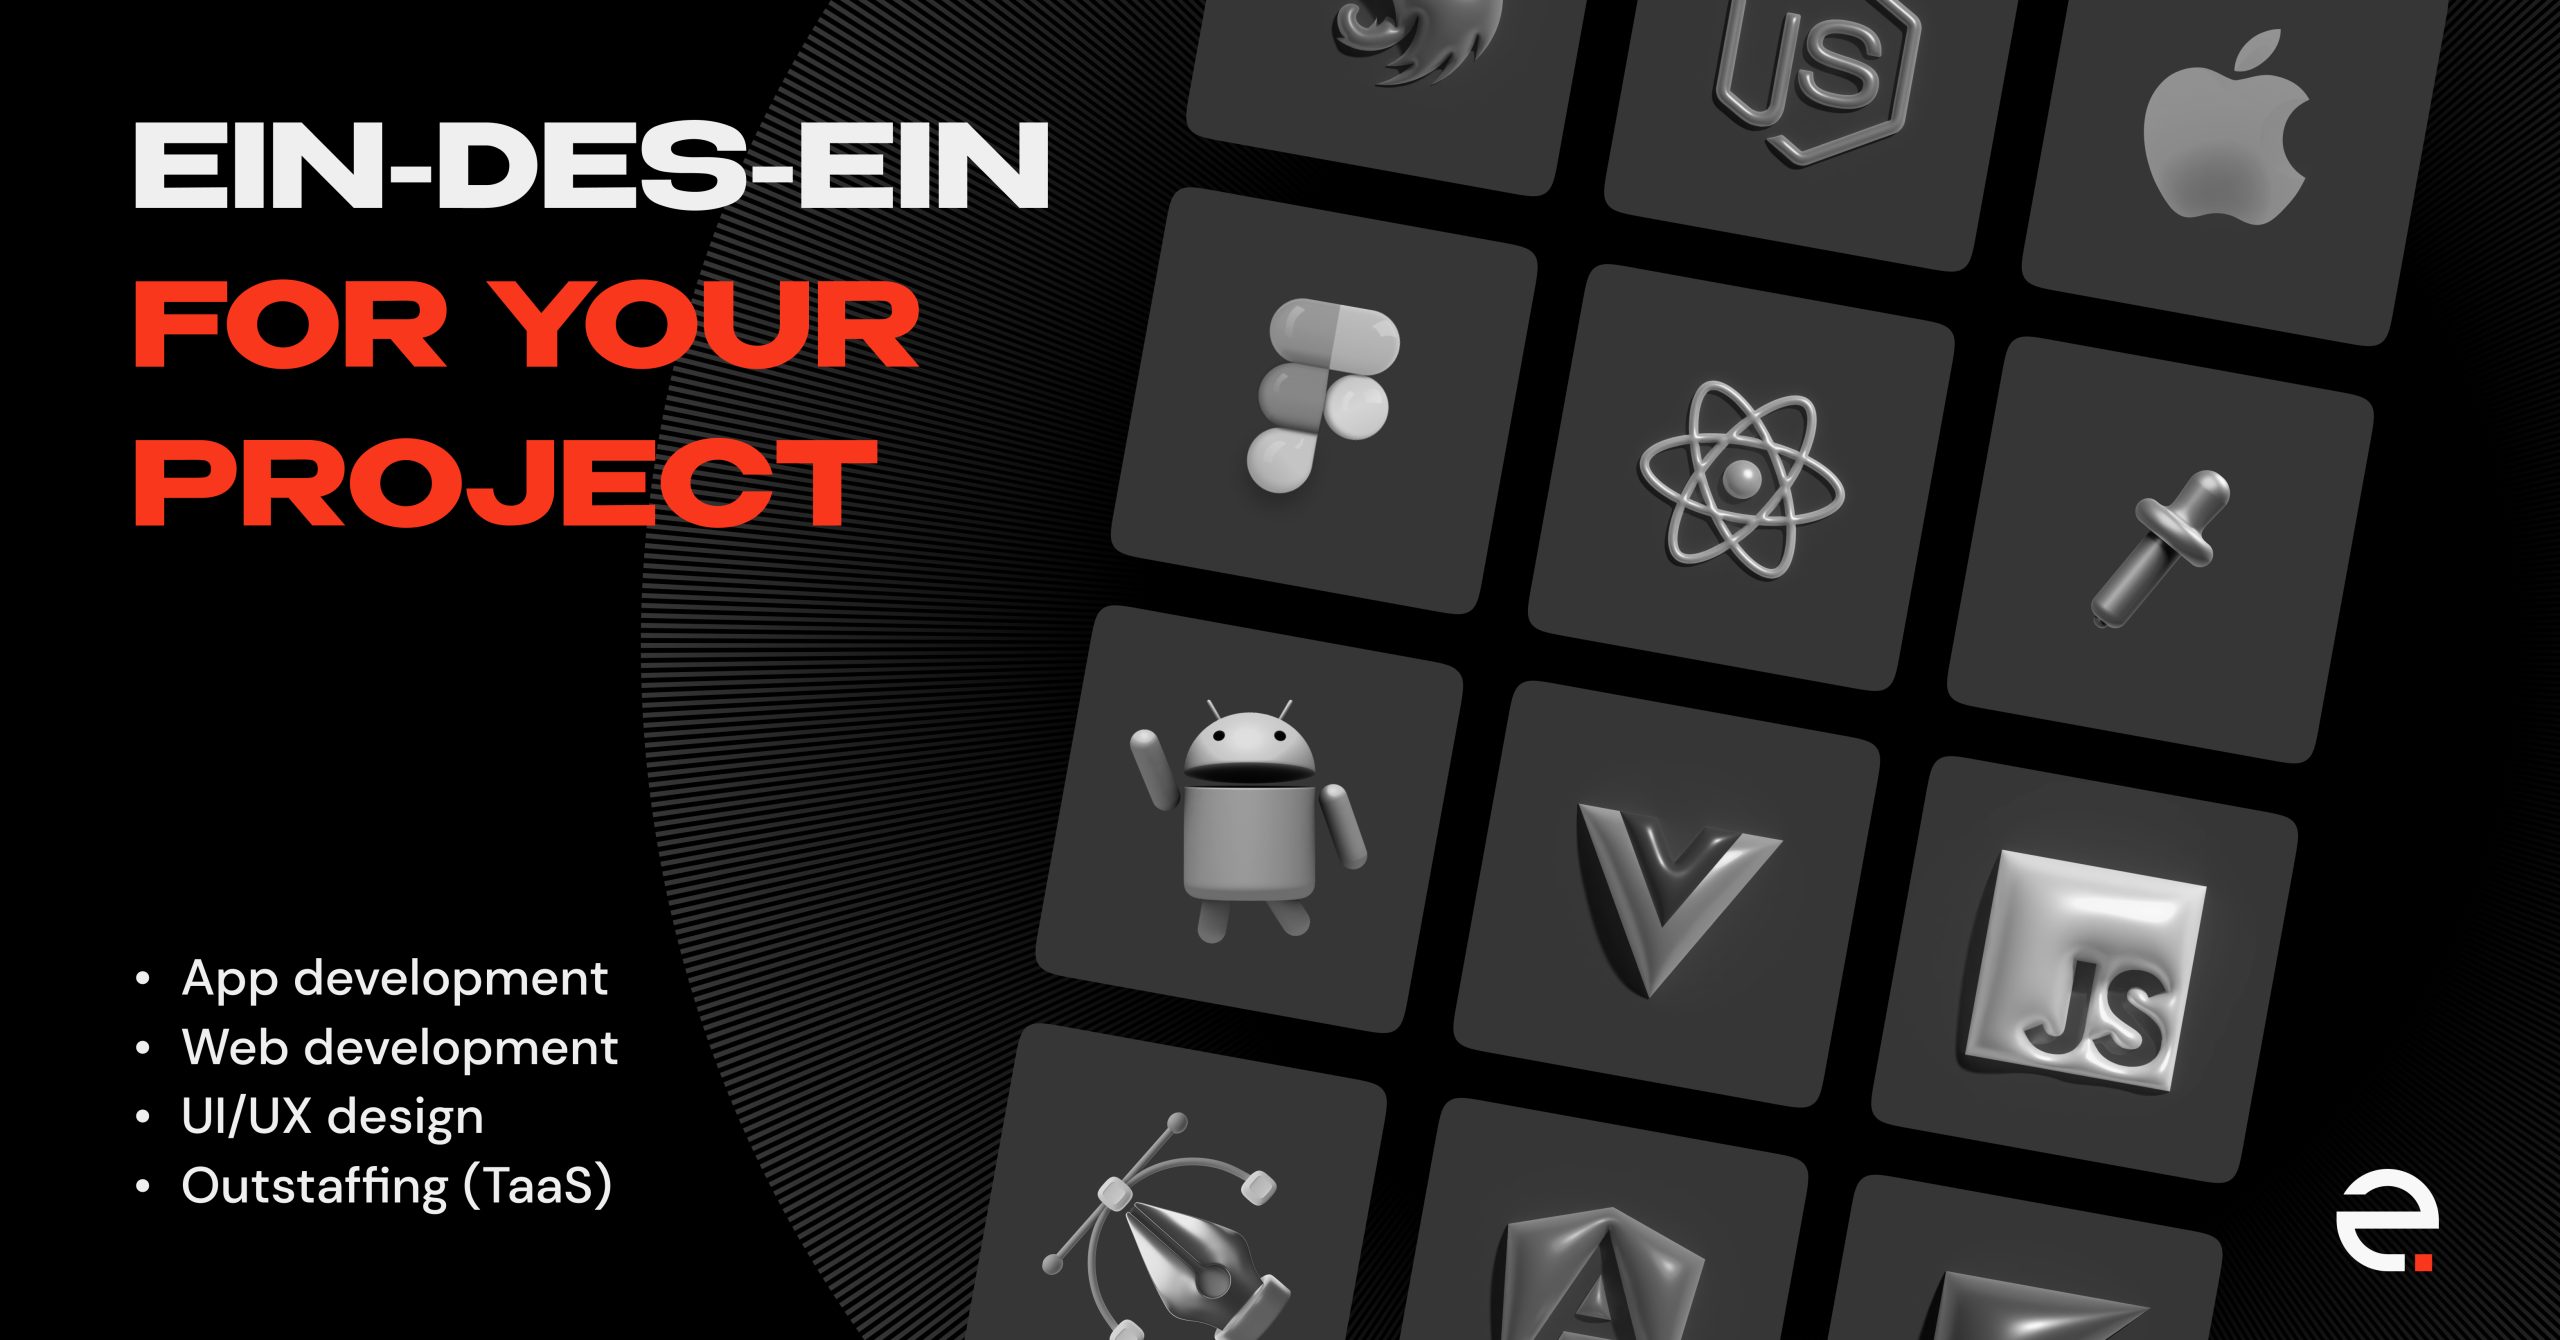 Why You Should Hire Ein-des-ein for Your Next Web Design and Development Project